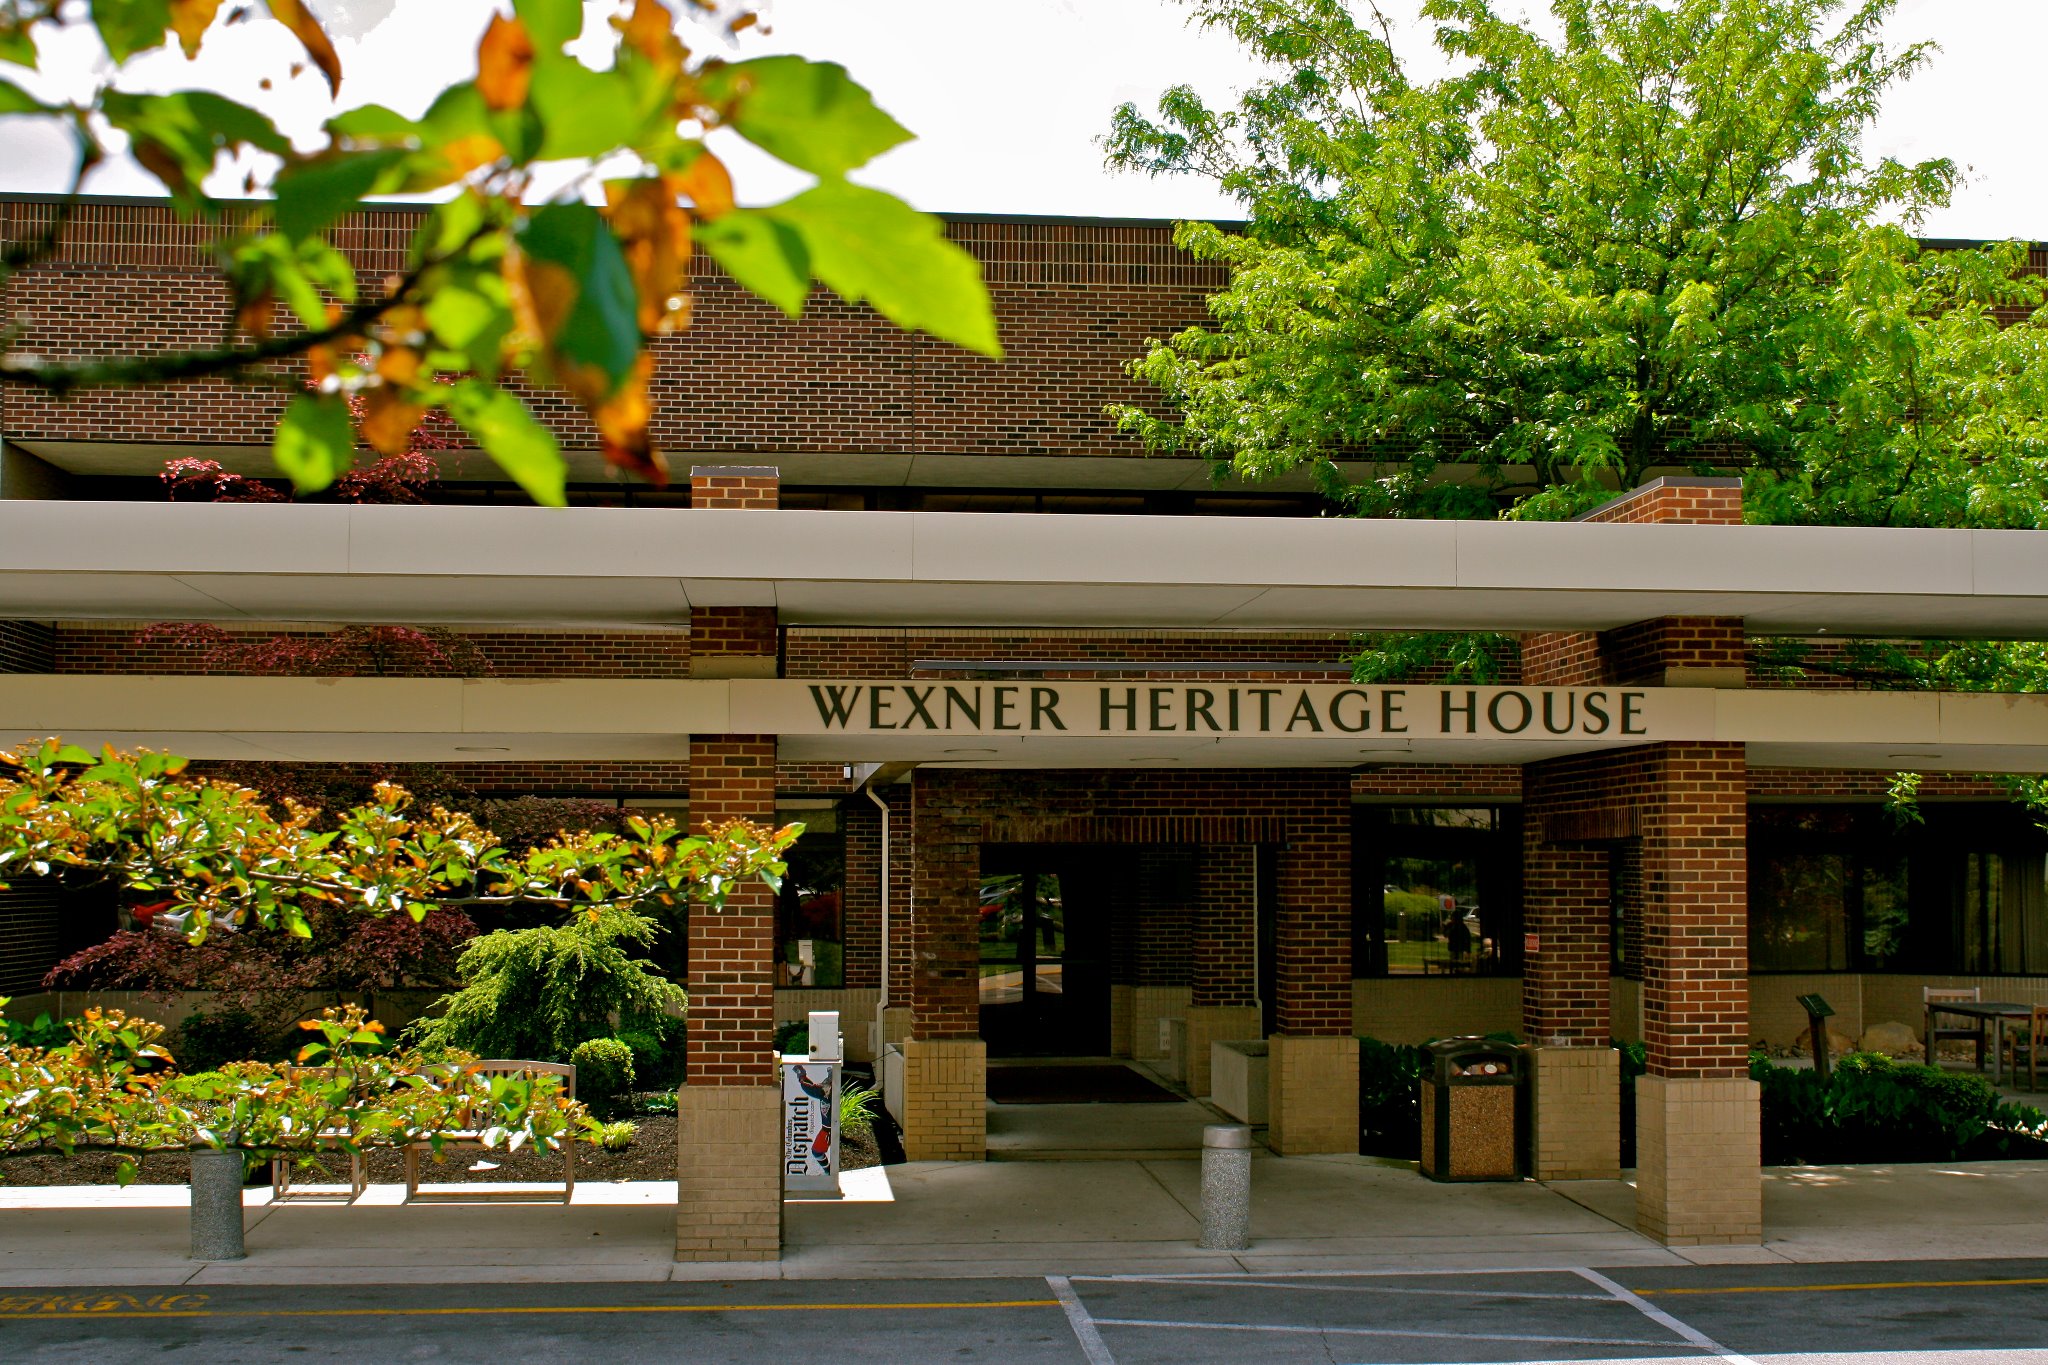 wexner-heritage-house-image-1